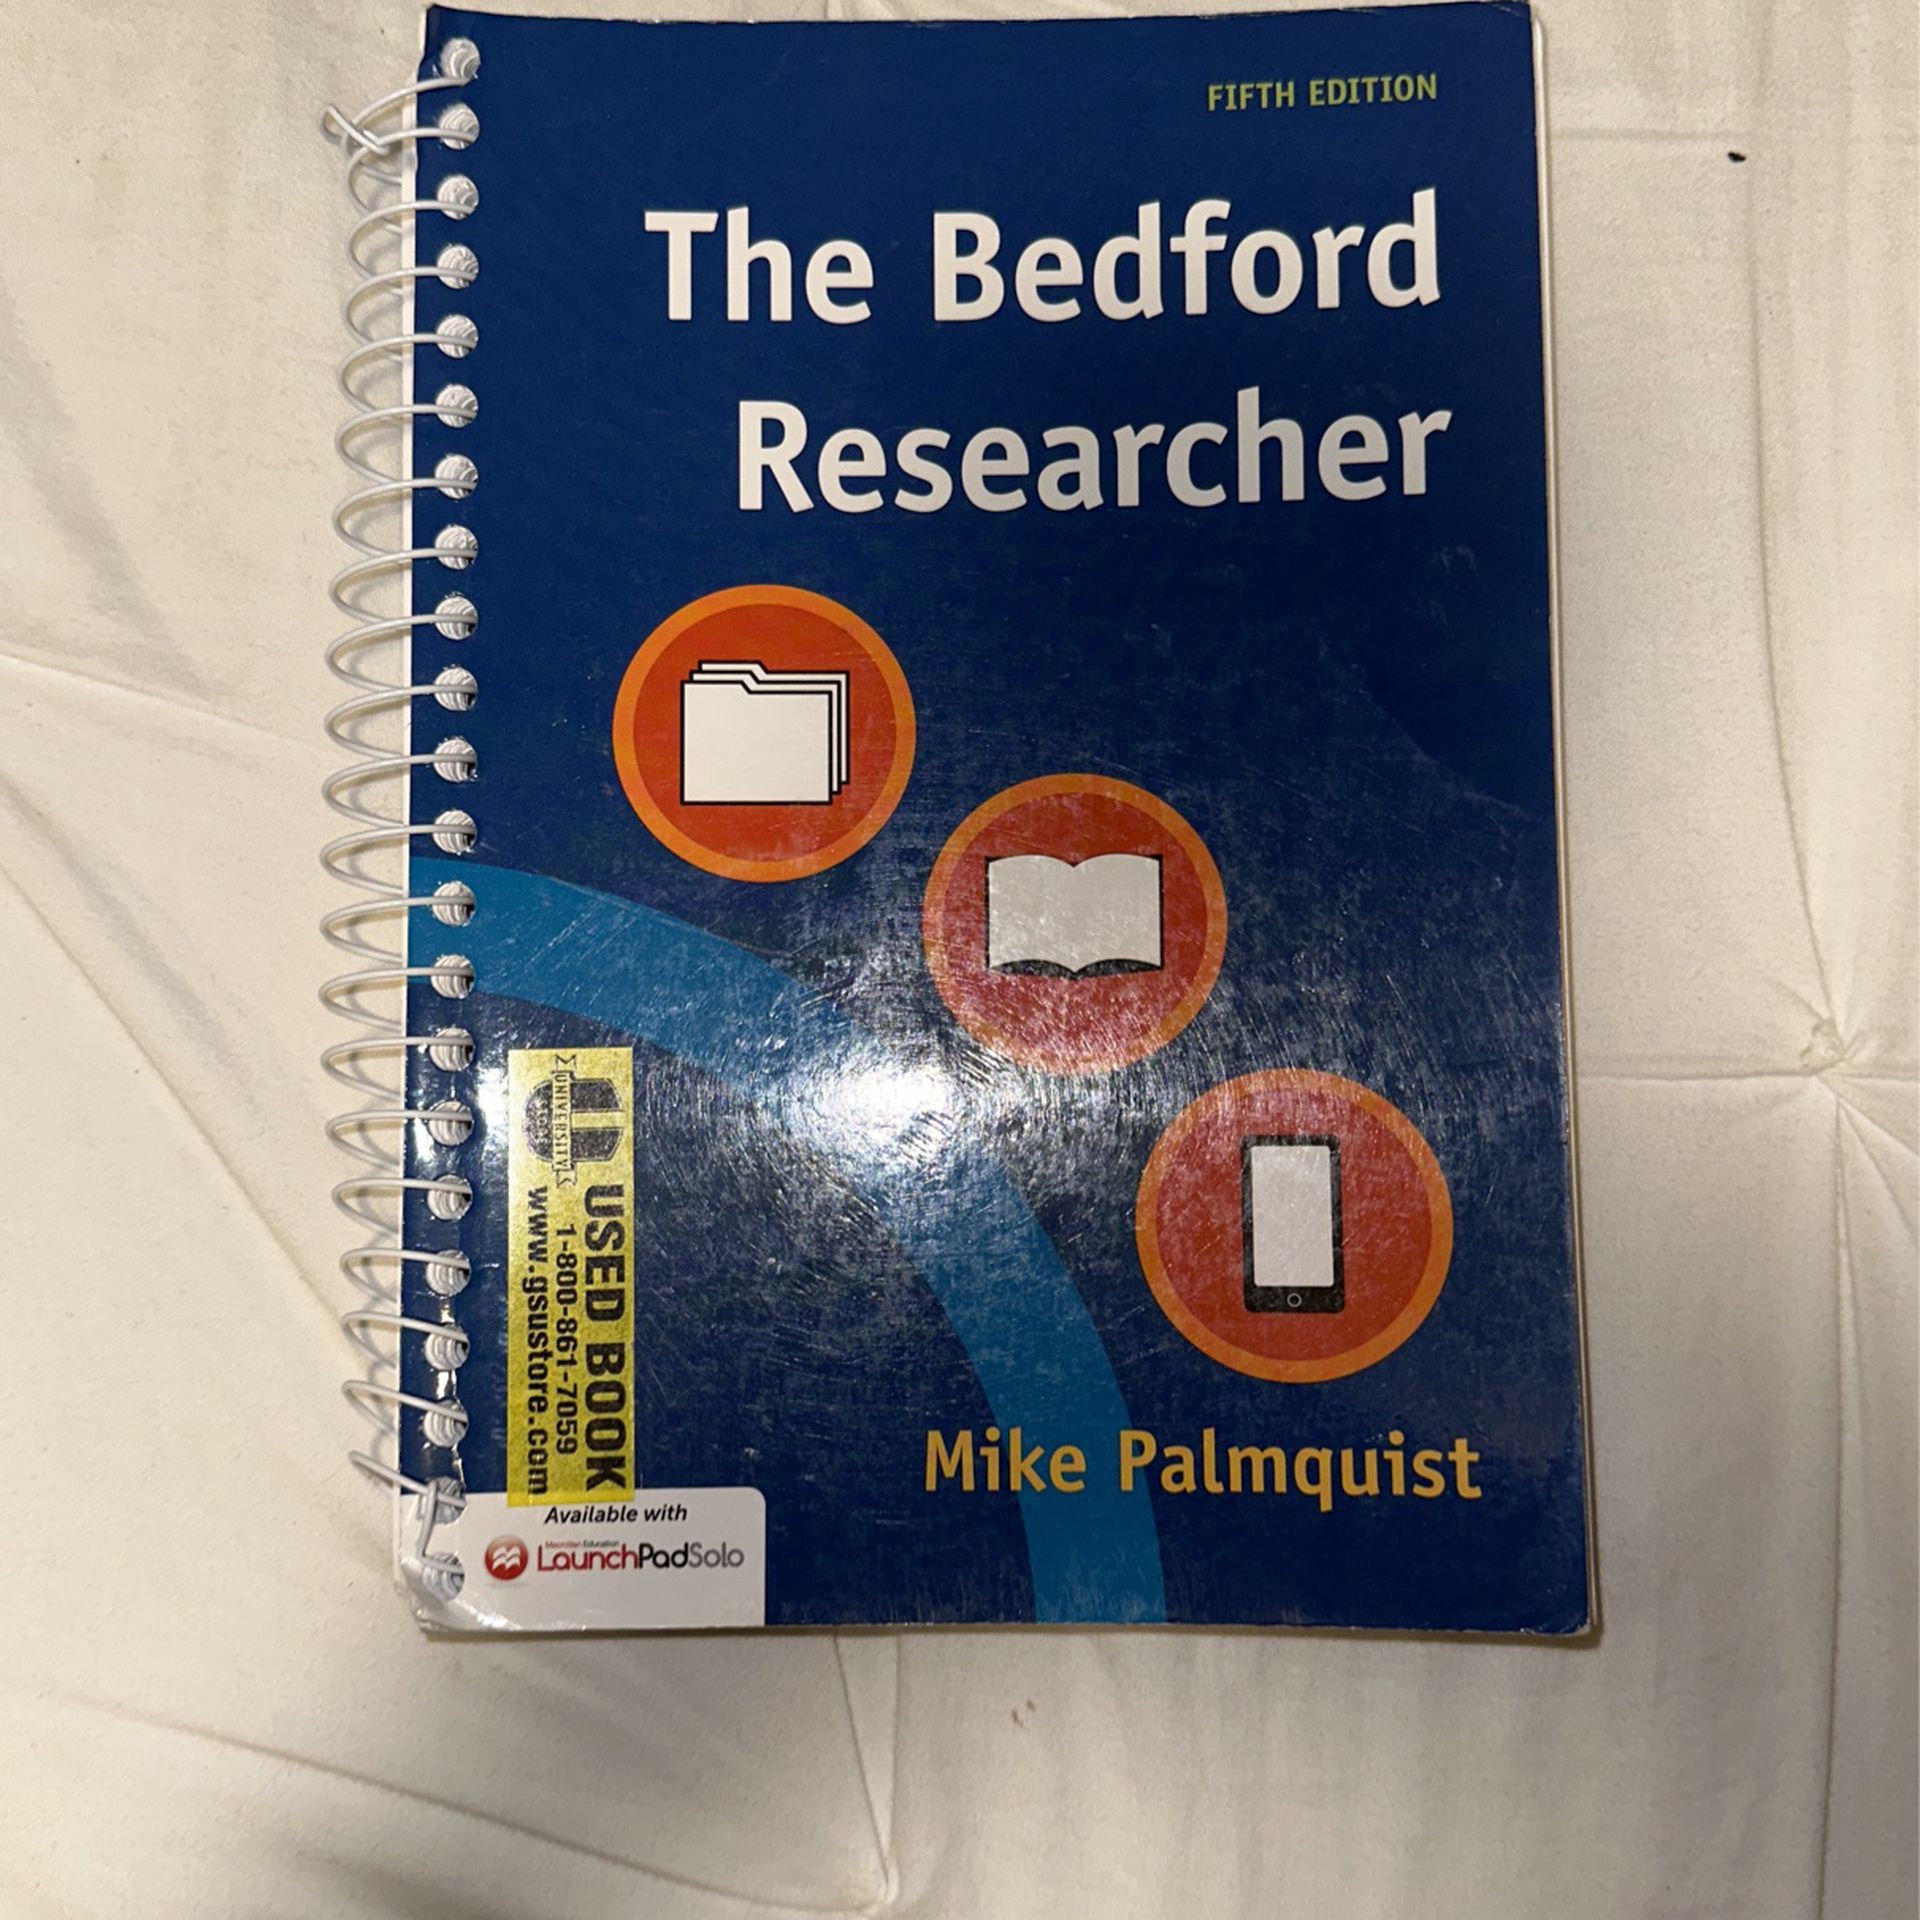 The Bedford Researcher